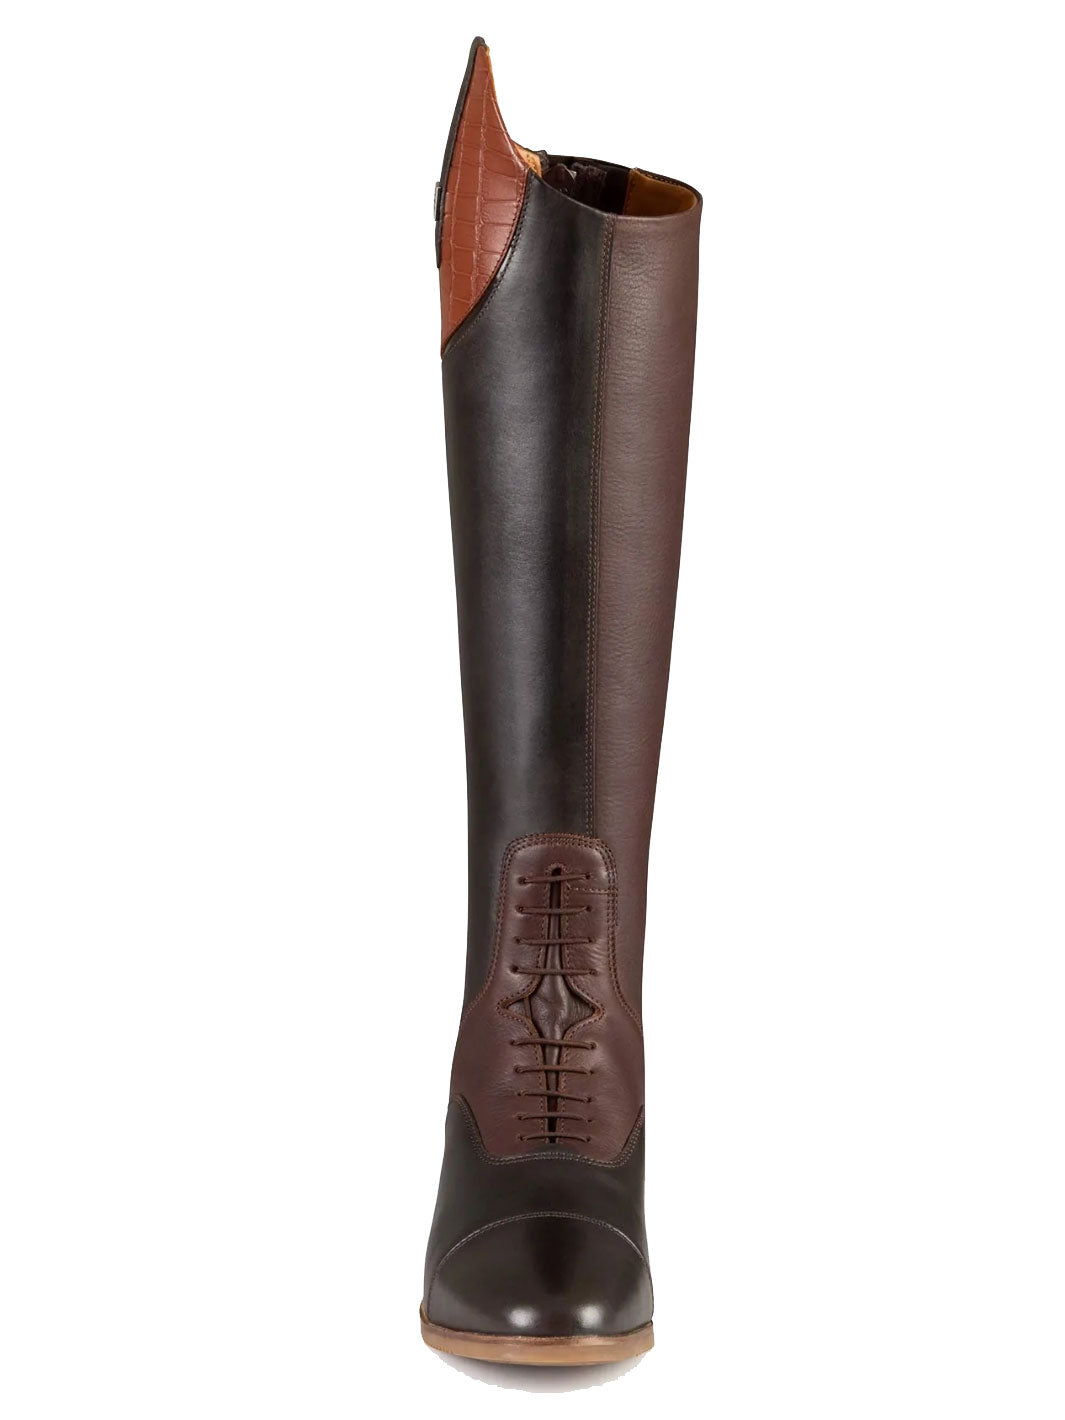 NEW! PE Passaggio Ladies Long Leather Field Tall Riding Boots Brown